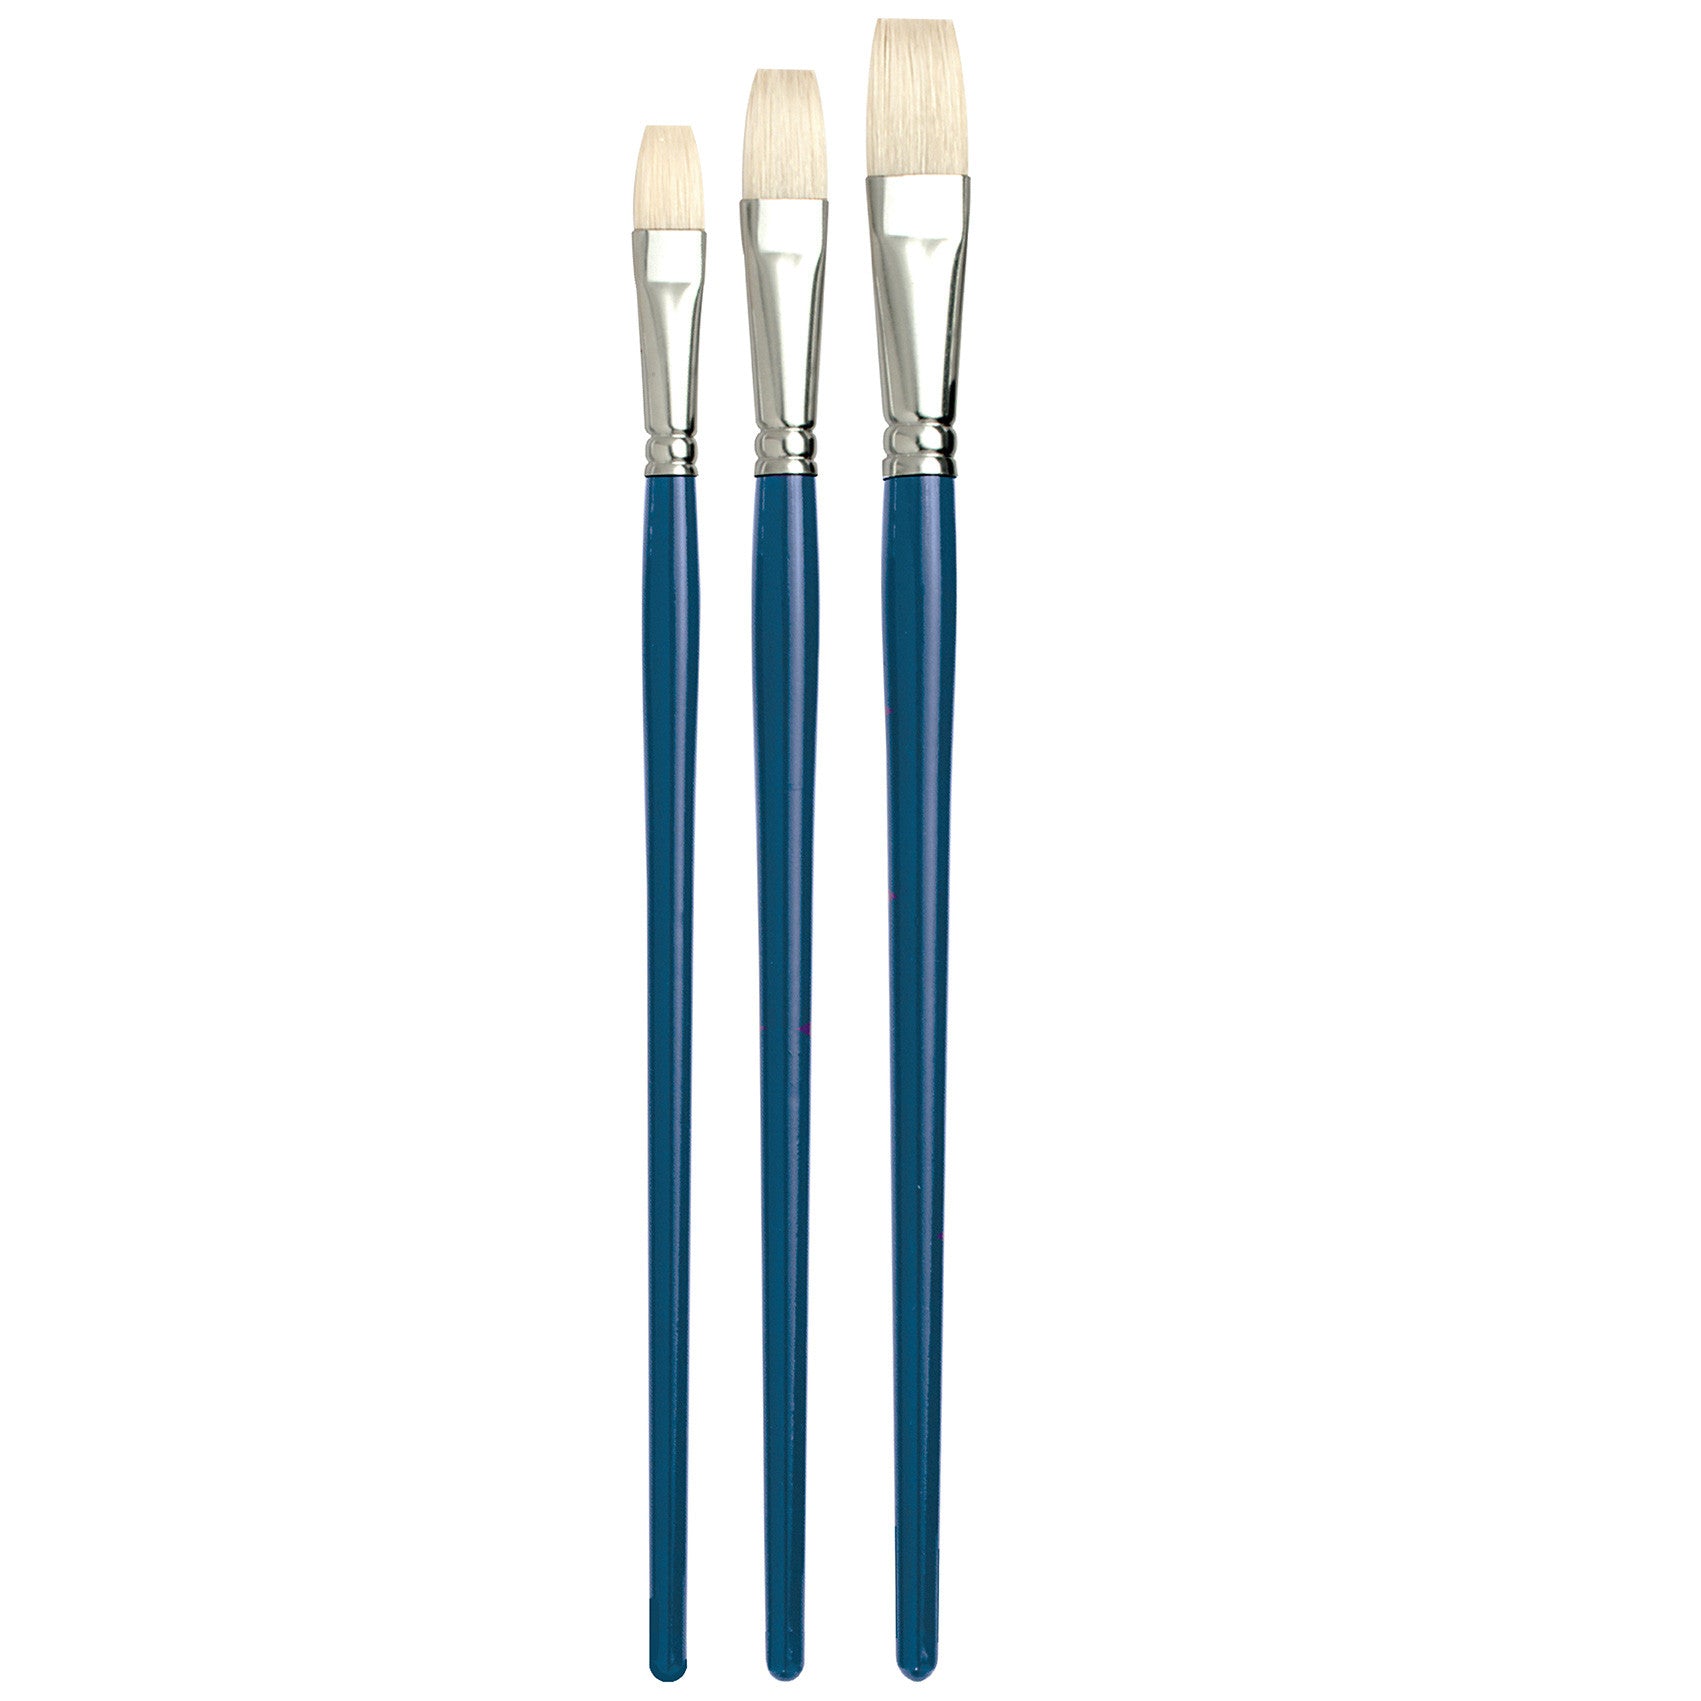 The Pro Arte Series C Studio Hog features four distinct shapes - Rounds, Flats, Filberts and Fans - for an affordable price. All are great for student painters and feature seamless nickel ferrules. The Medium size handles are sealed with a blue lacquer finish.